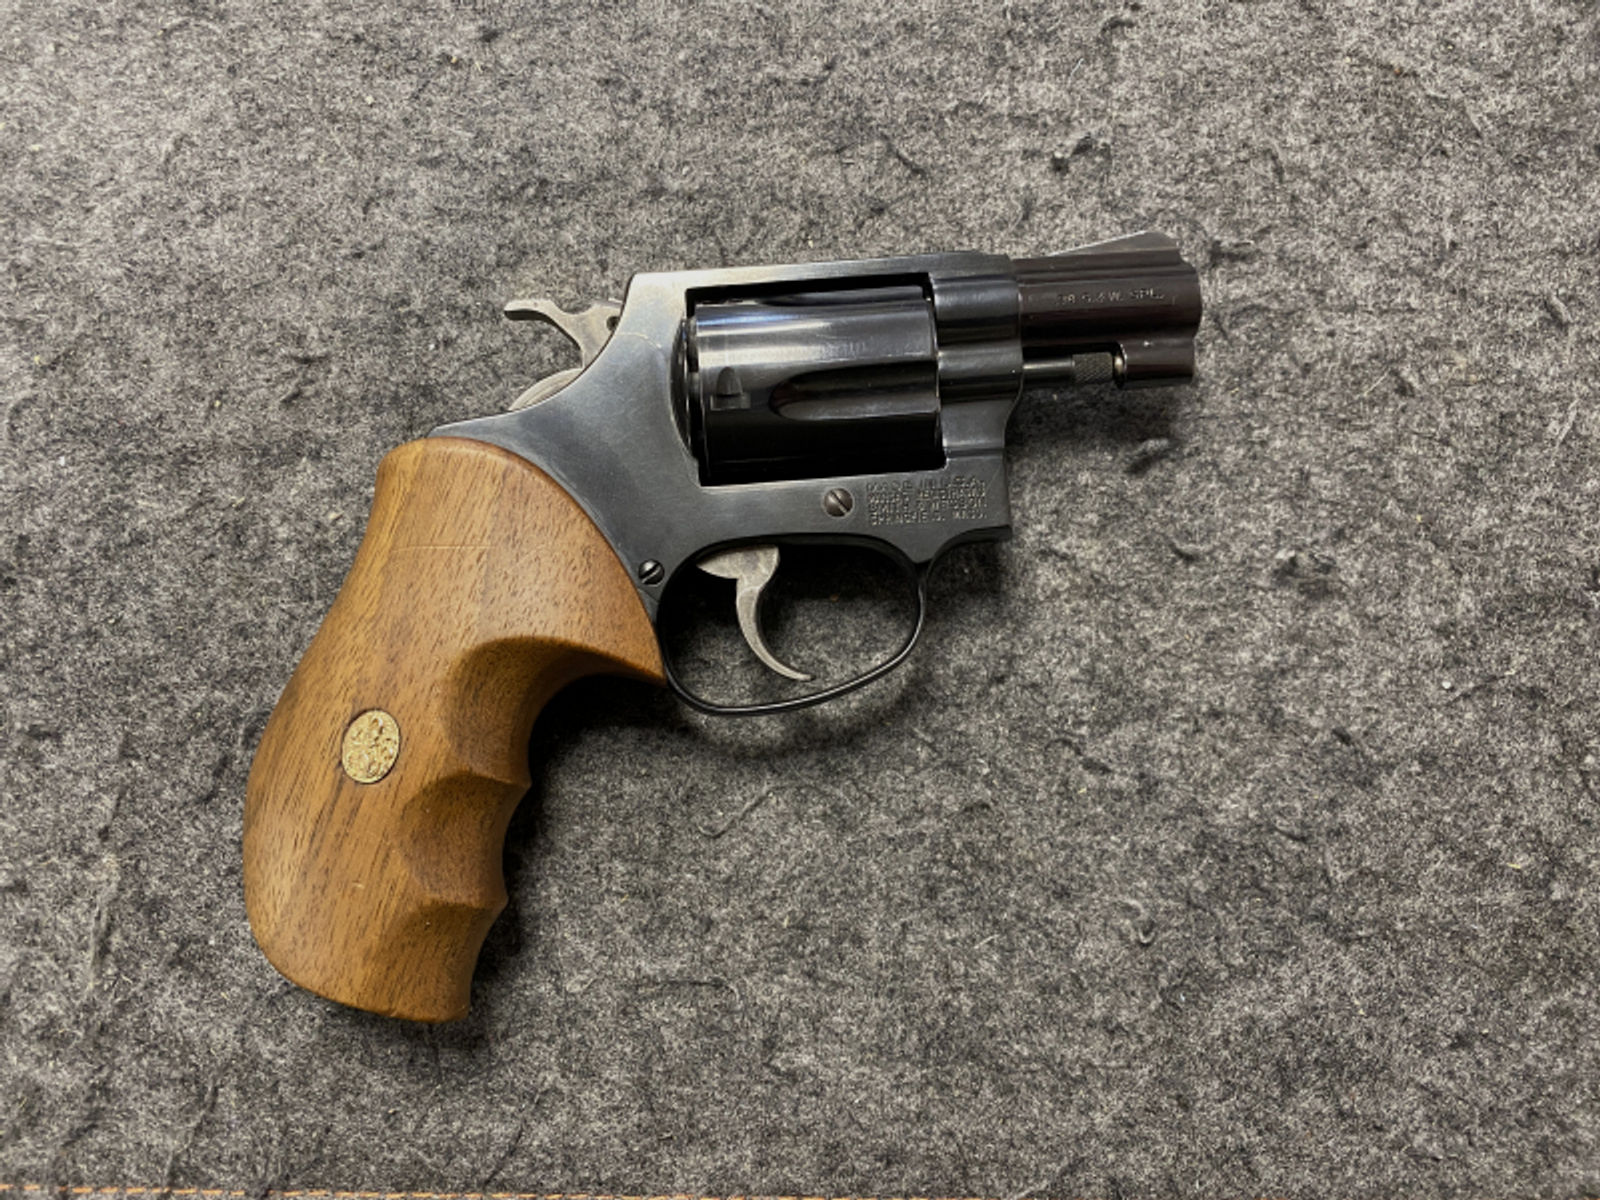 Smith&Wesson Mod. 36-7 Kal. .38 Special, Smith&Wesson, Smith & Wesson, Smith&Wesson M36